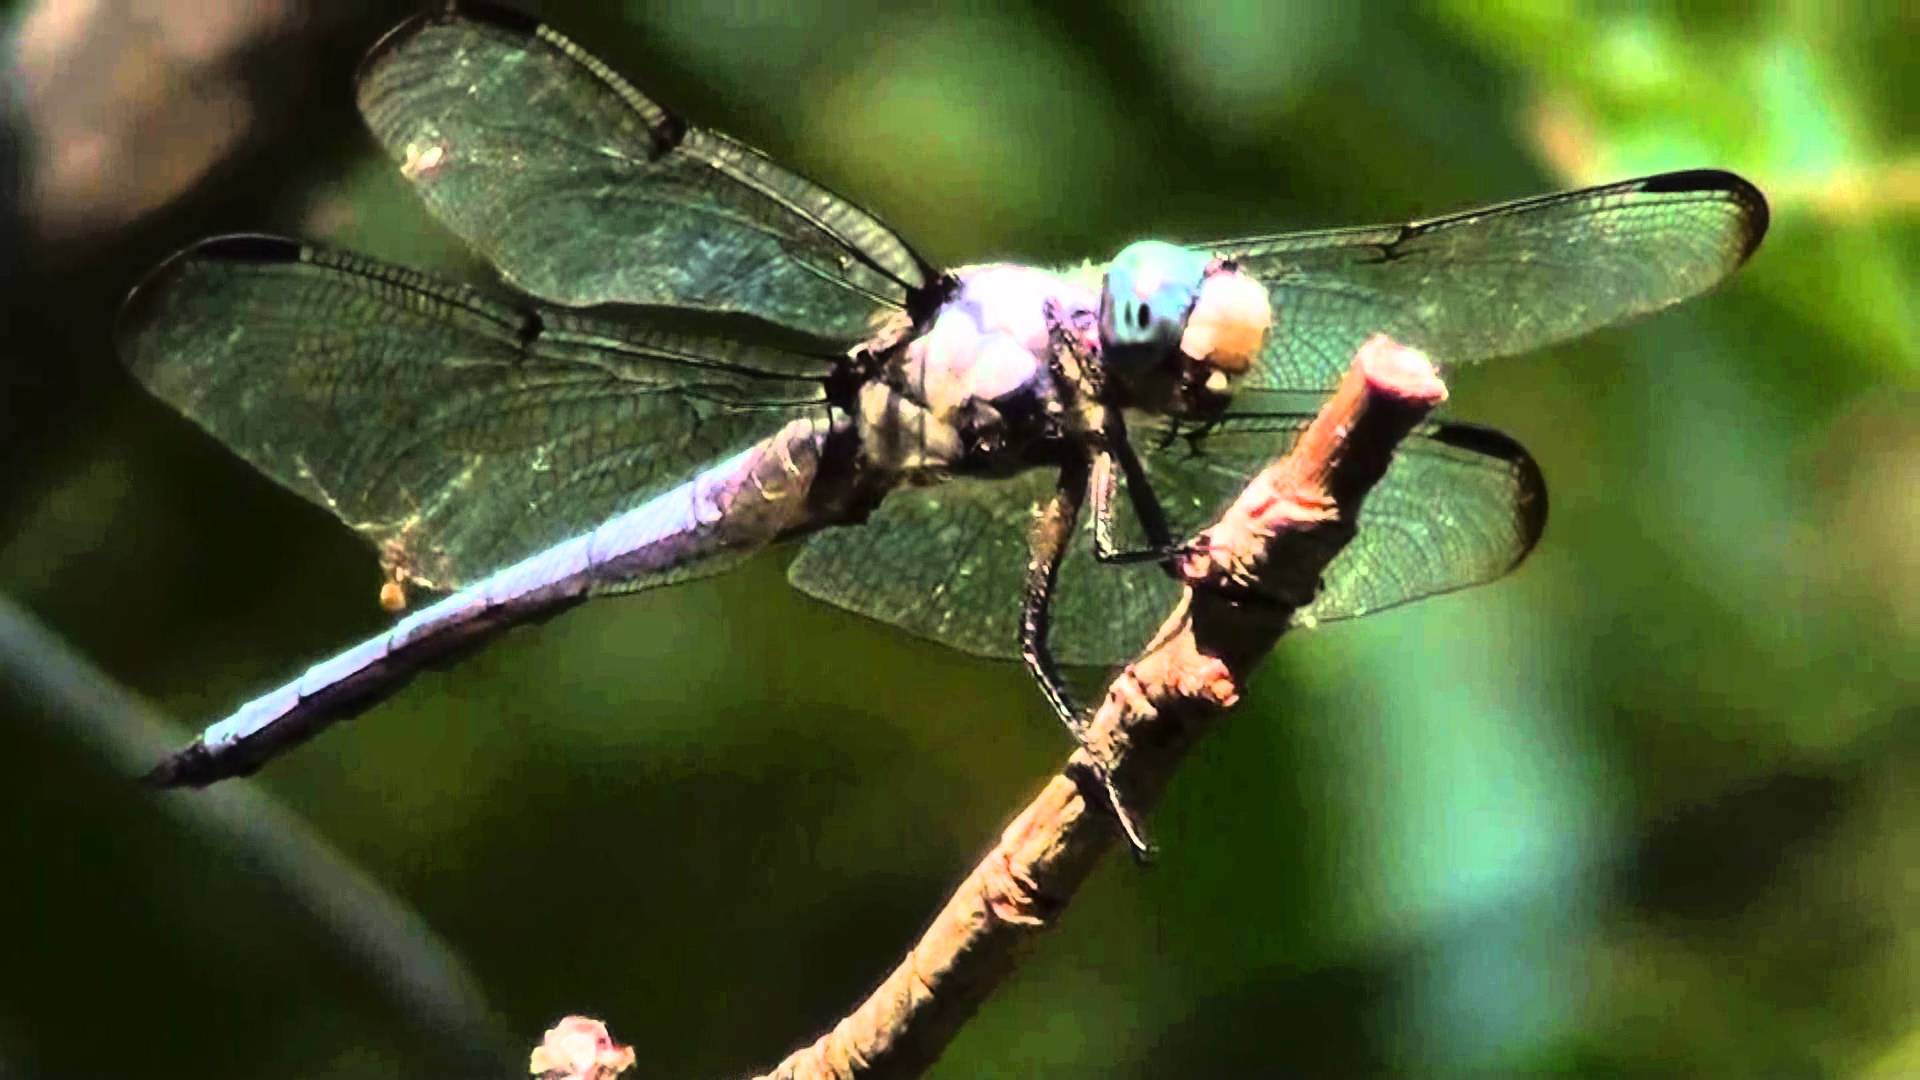 Dragonfly Cleaning its Eyes & Face & Reacting (